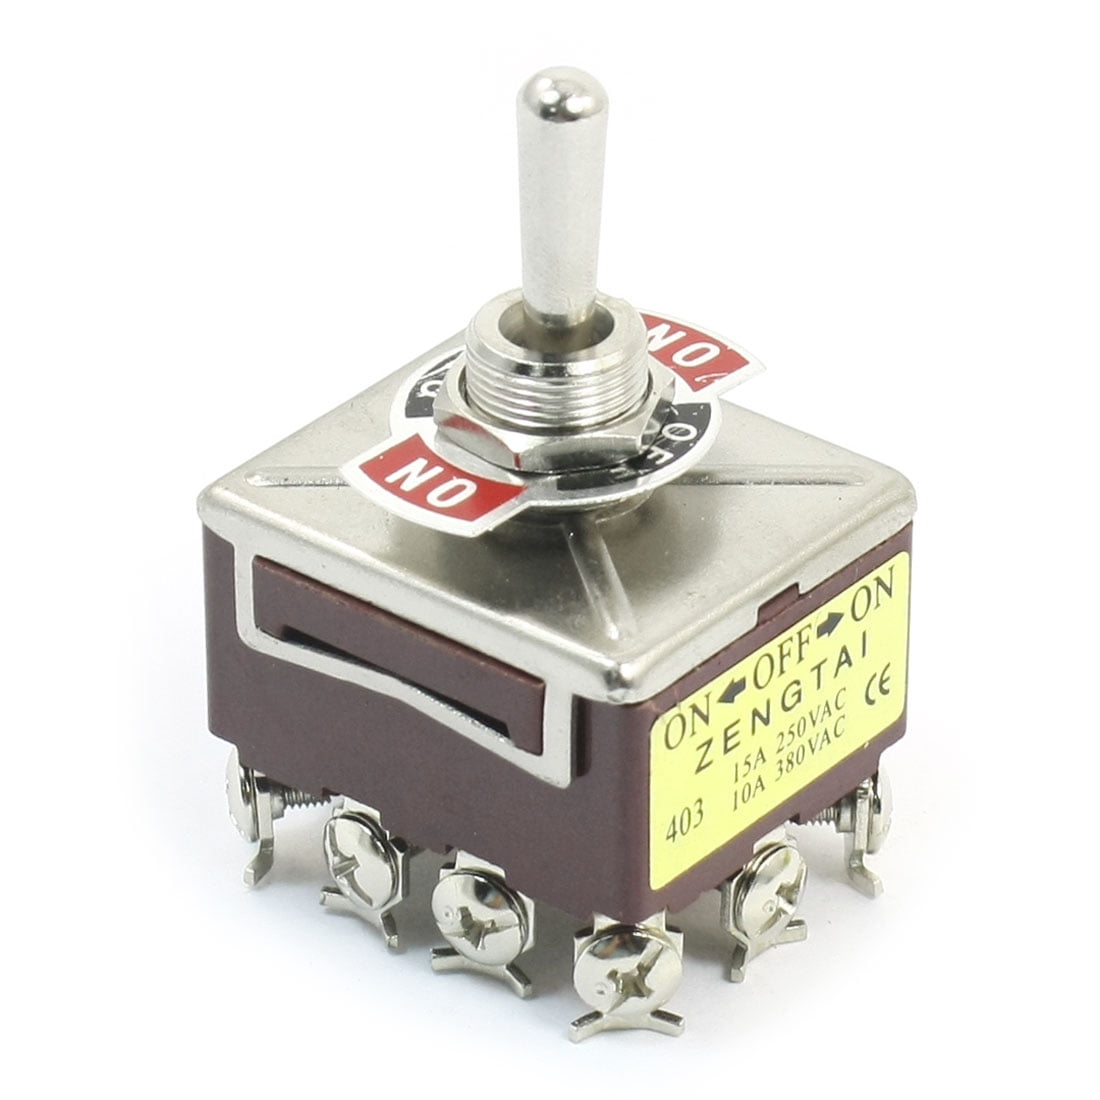 On/Off/On 3 Position DPDT 6 Screw Terminals Toggle Switch AC 250V 15A O5S3 